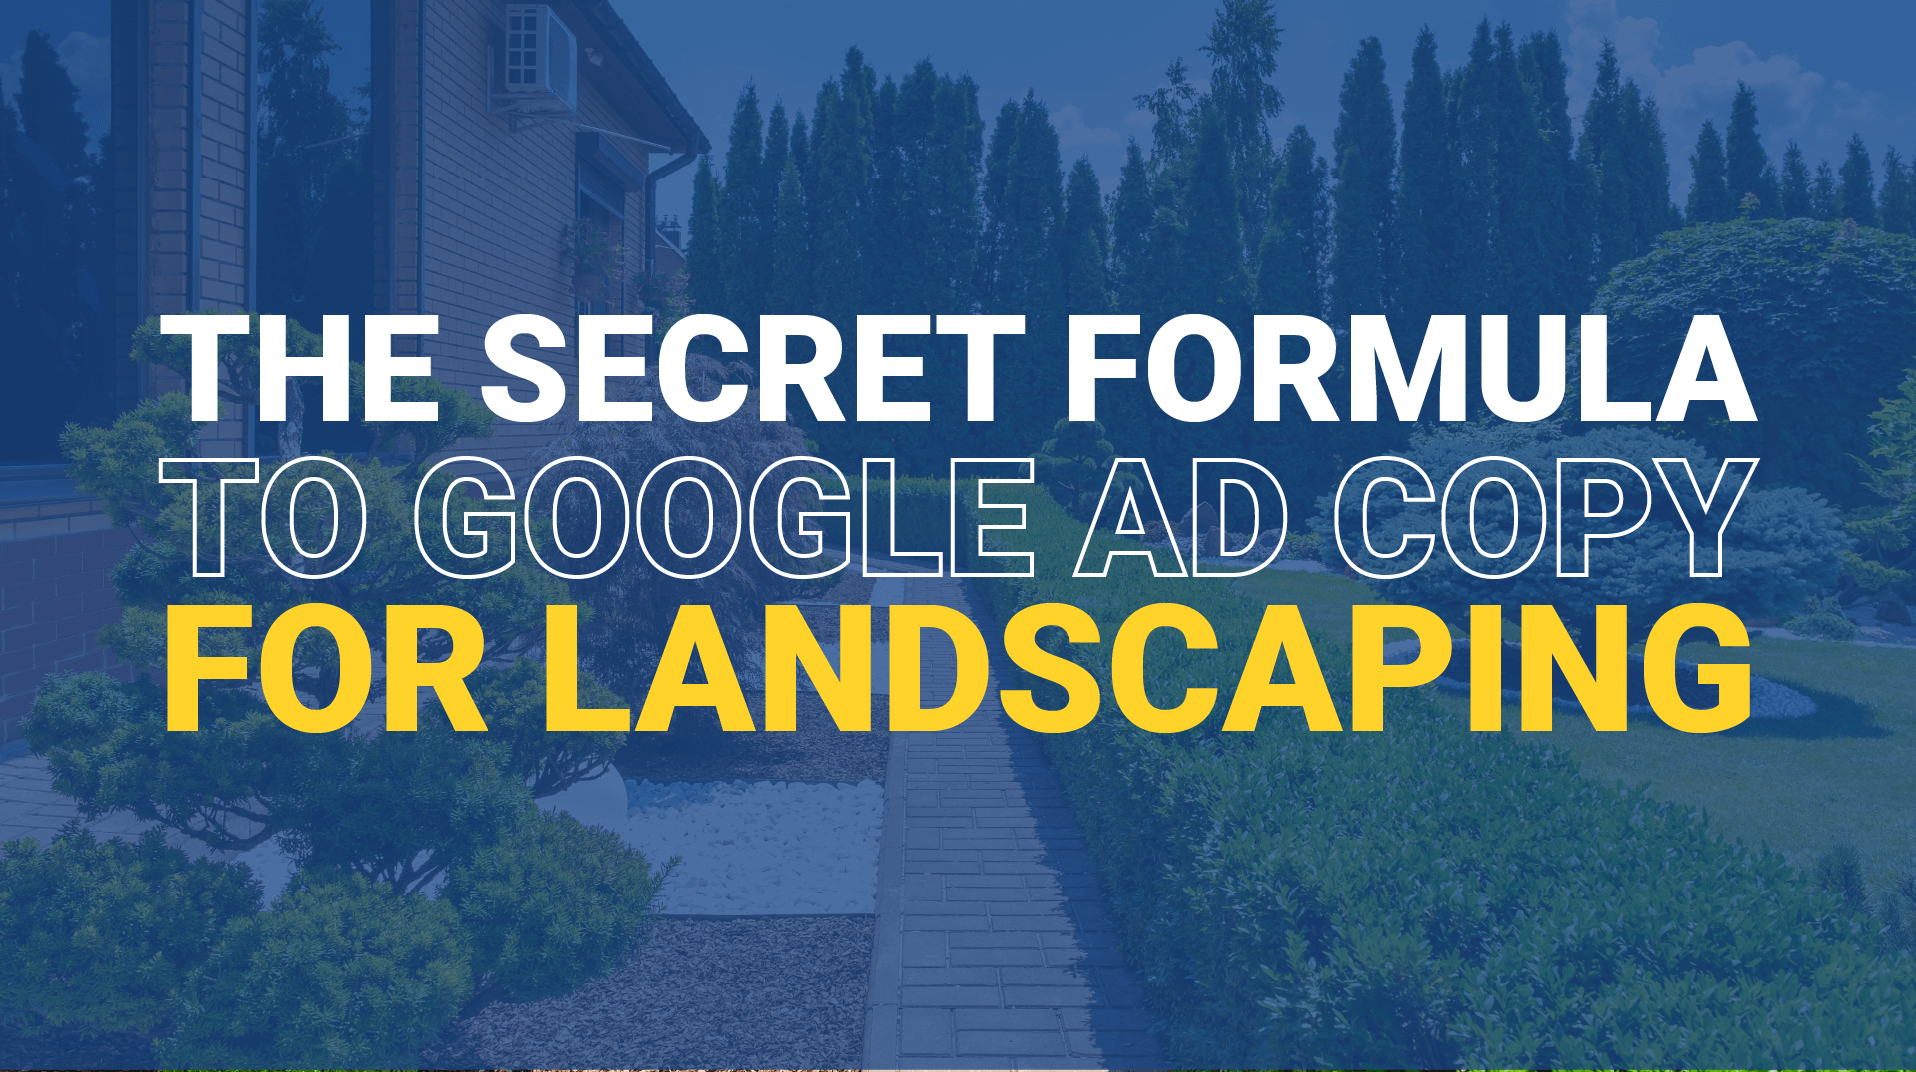 The Secret Formula to Google Ad Copy for Landscaping Business